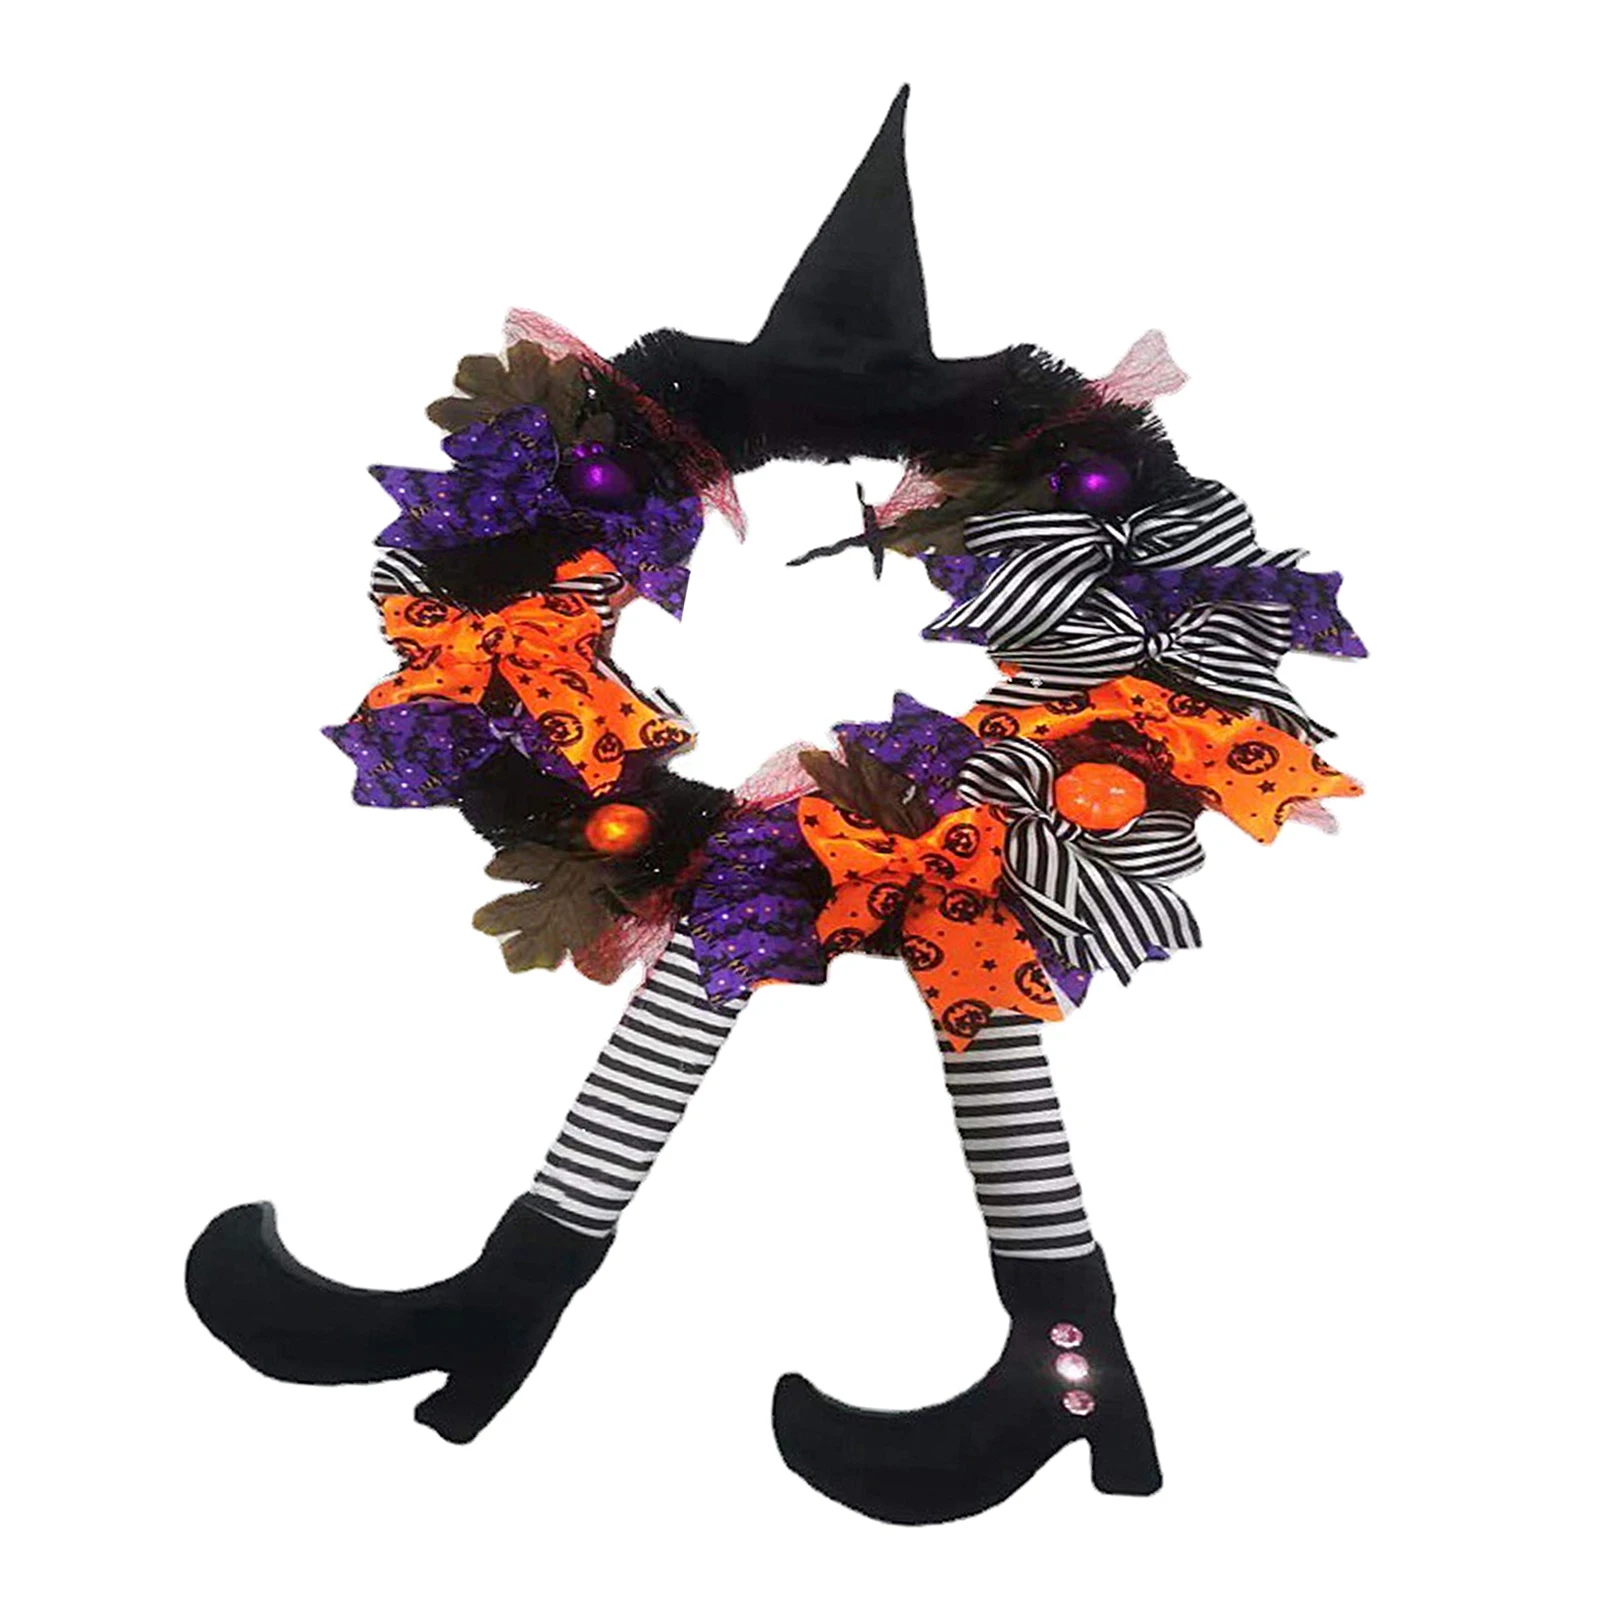 Garland Pendant Window Witch'S Halloween Decorations Halloween Door Decoration Wreath with Pumpkin for Party